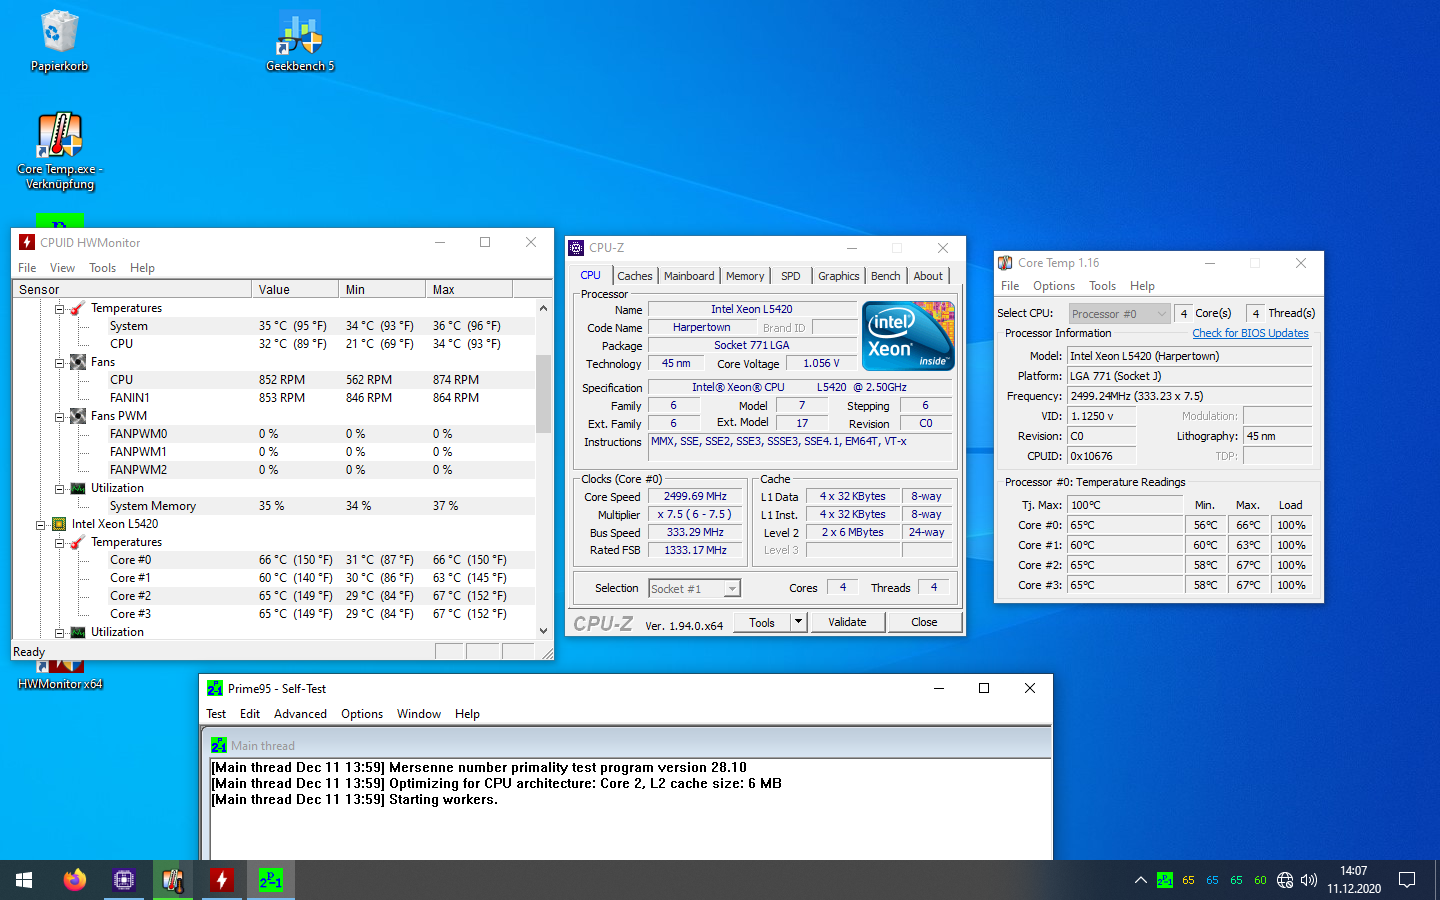 xeon-L5420-load-stock.png